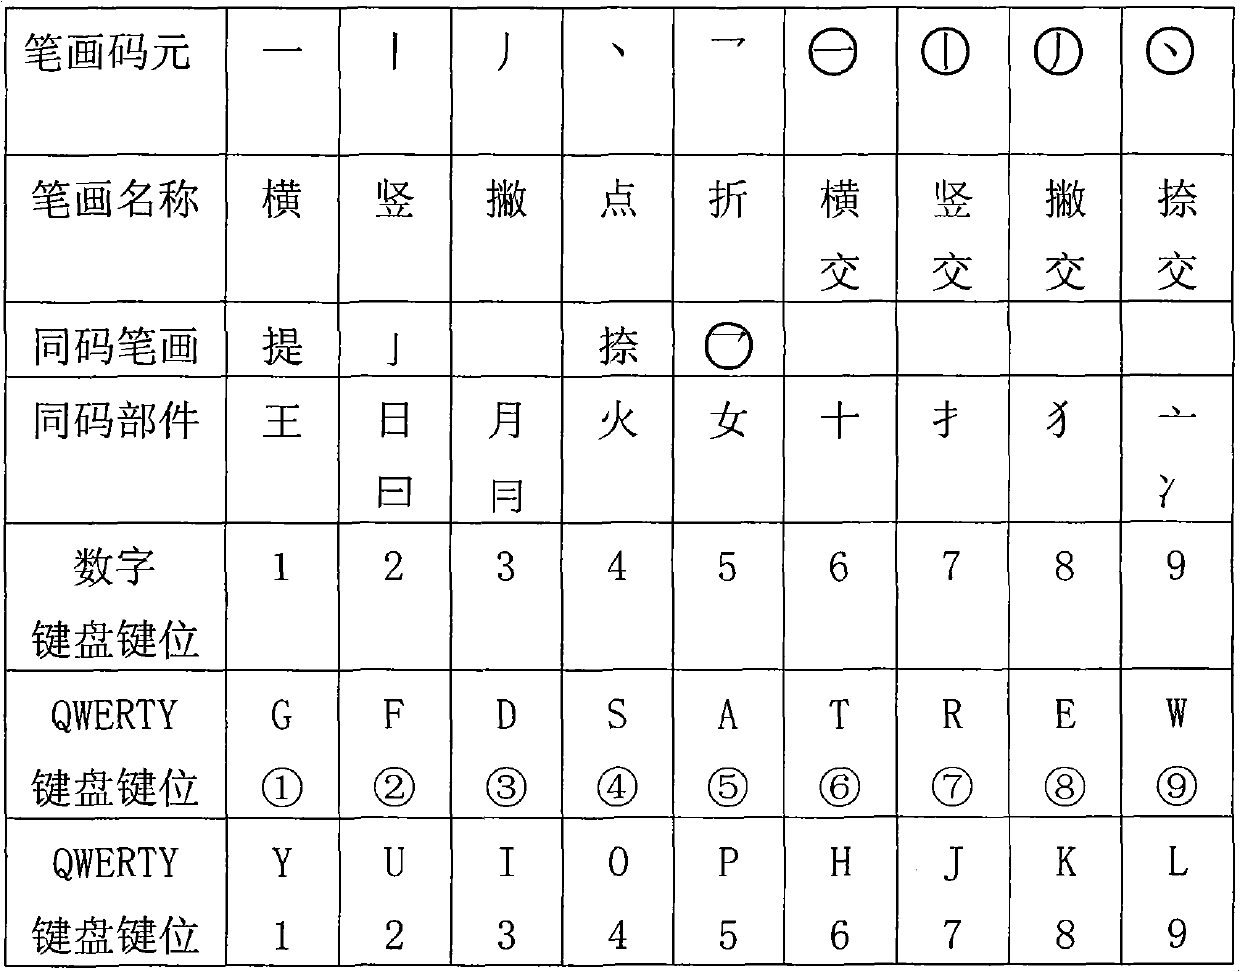 Chinese digital pinyin and stroke combination input method and keyboard